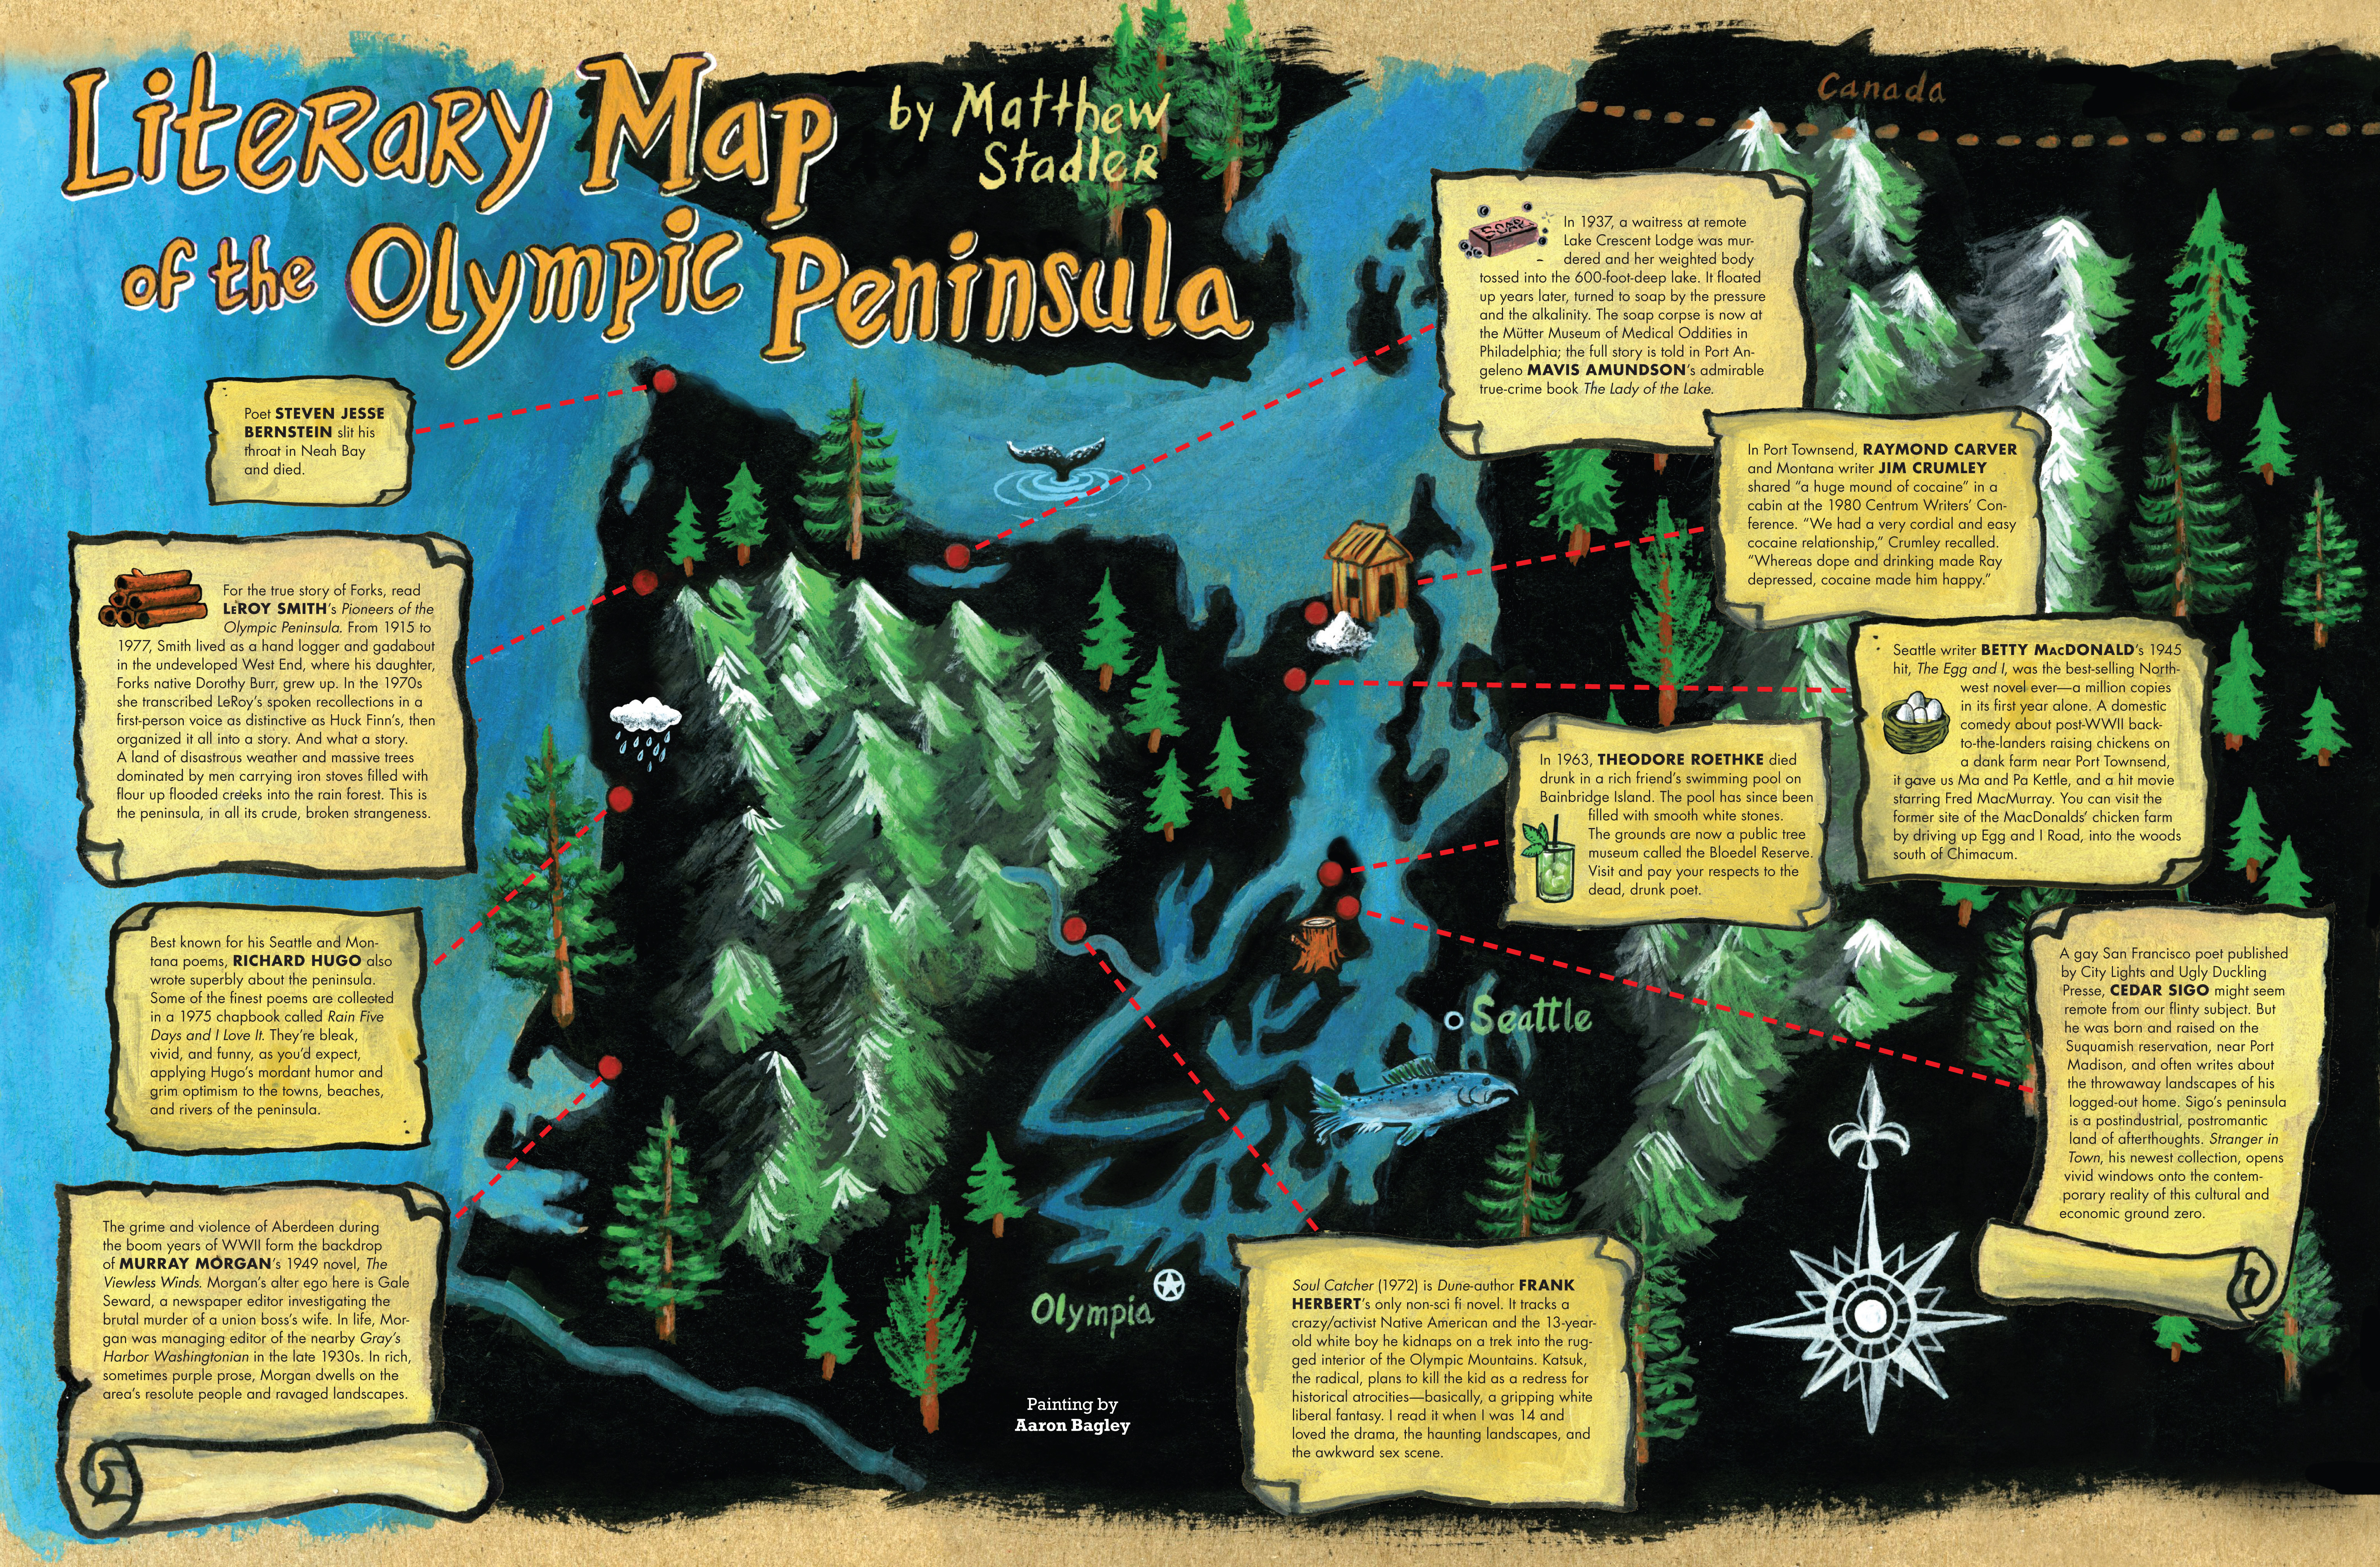 The Literary Map of the Olympic Peninsula misses a number of items